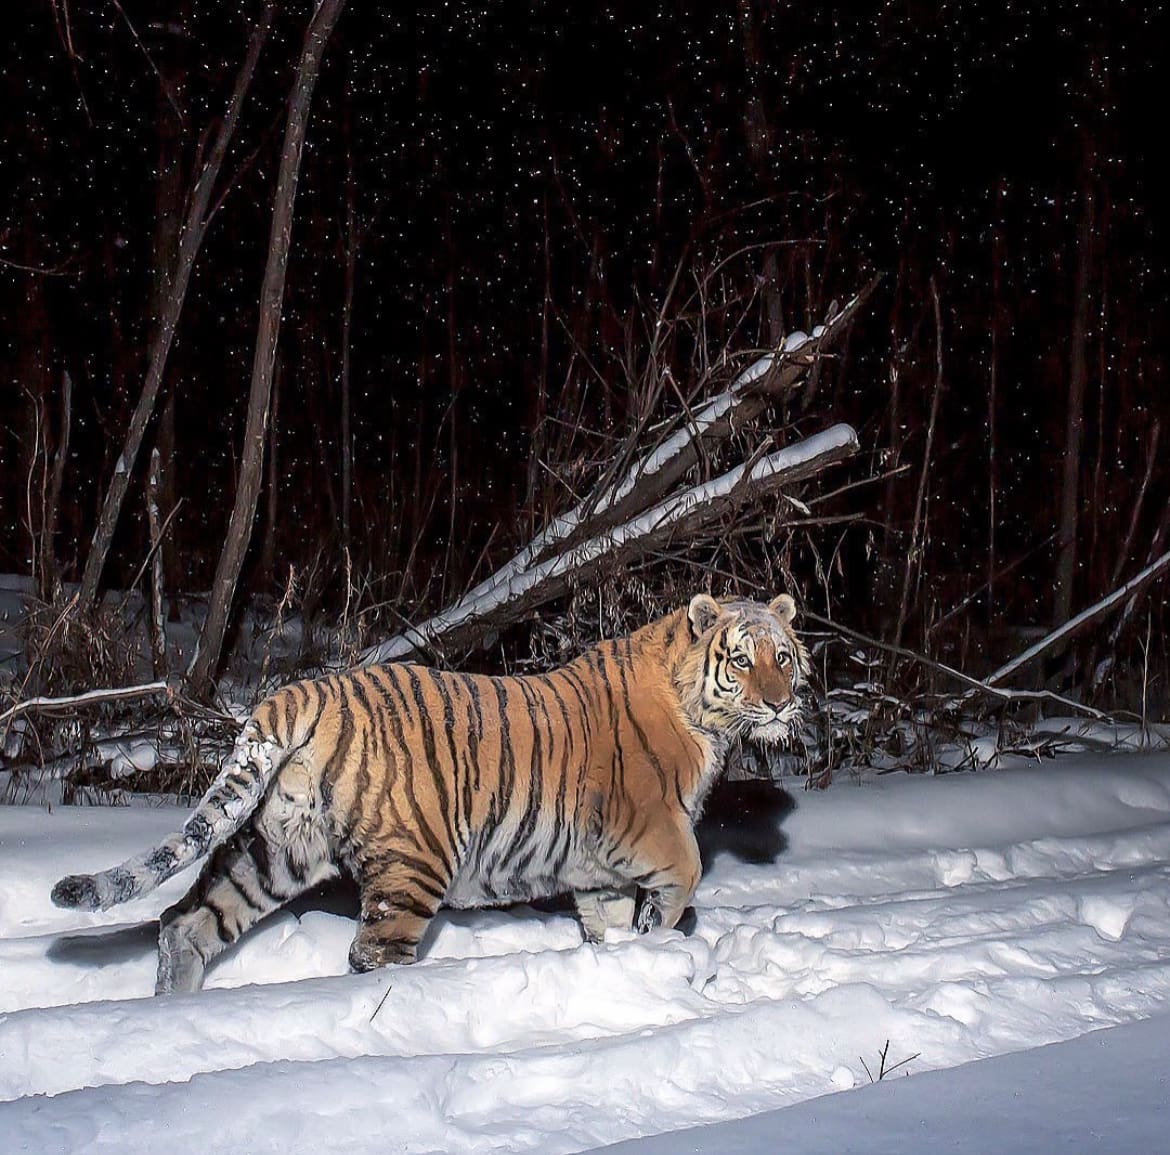 Amur Tiger caught on camera trap, under the cover of darkness 